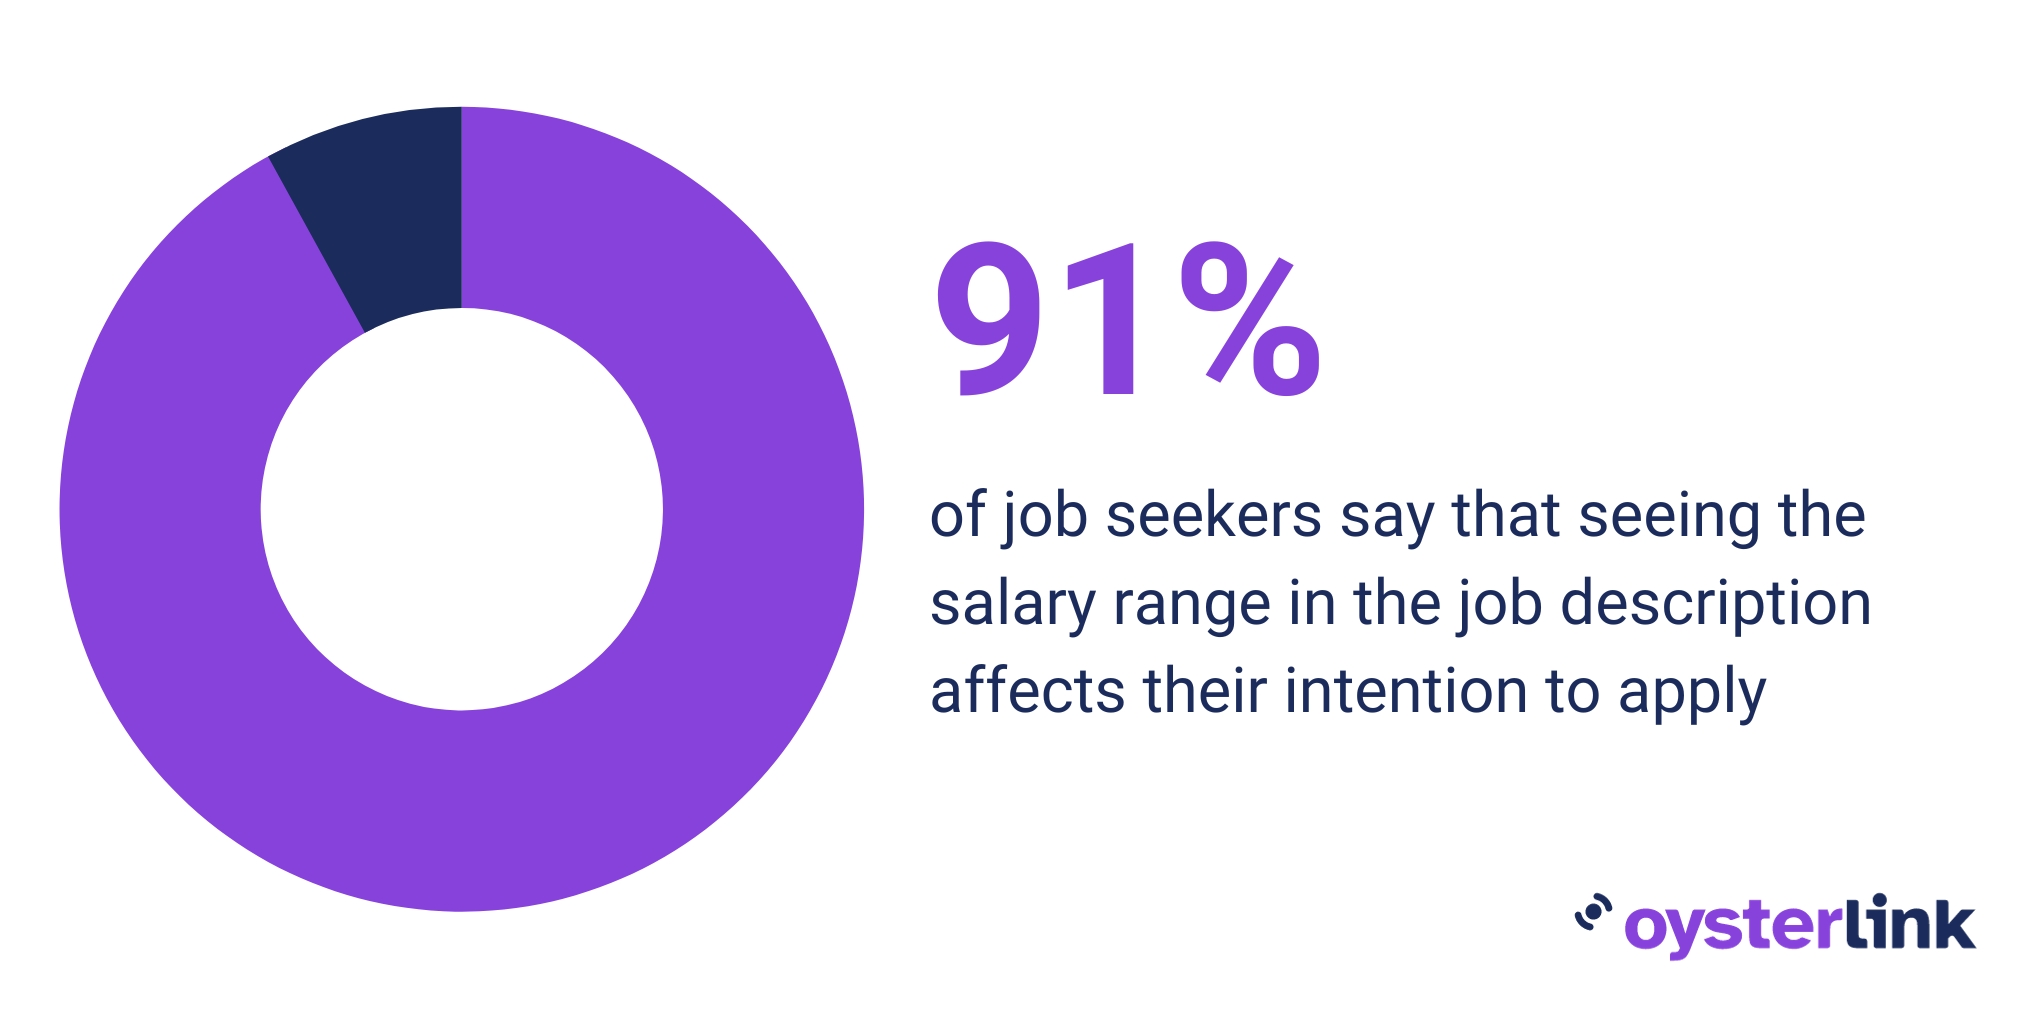 A graphic showing how 91% of job seekers say that seeing the salary range in the job description affects their intention to apply